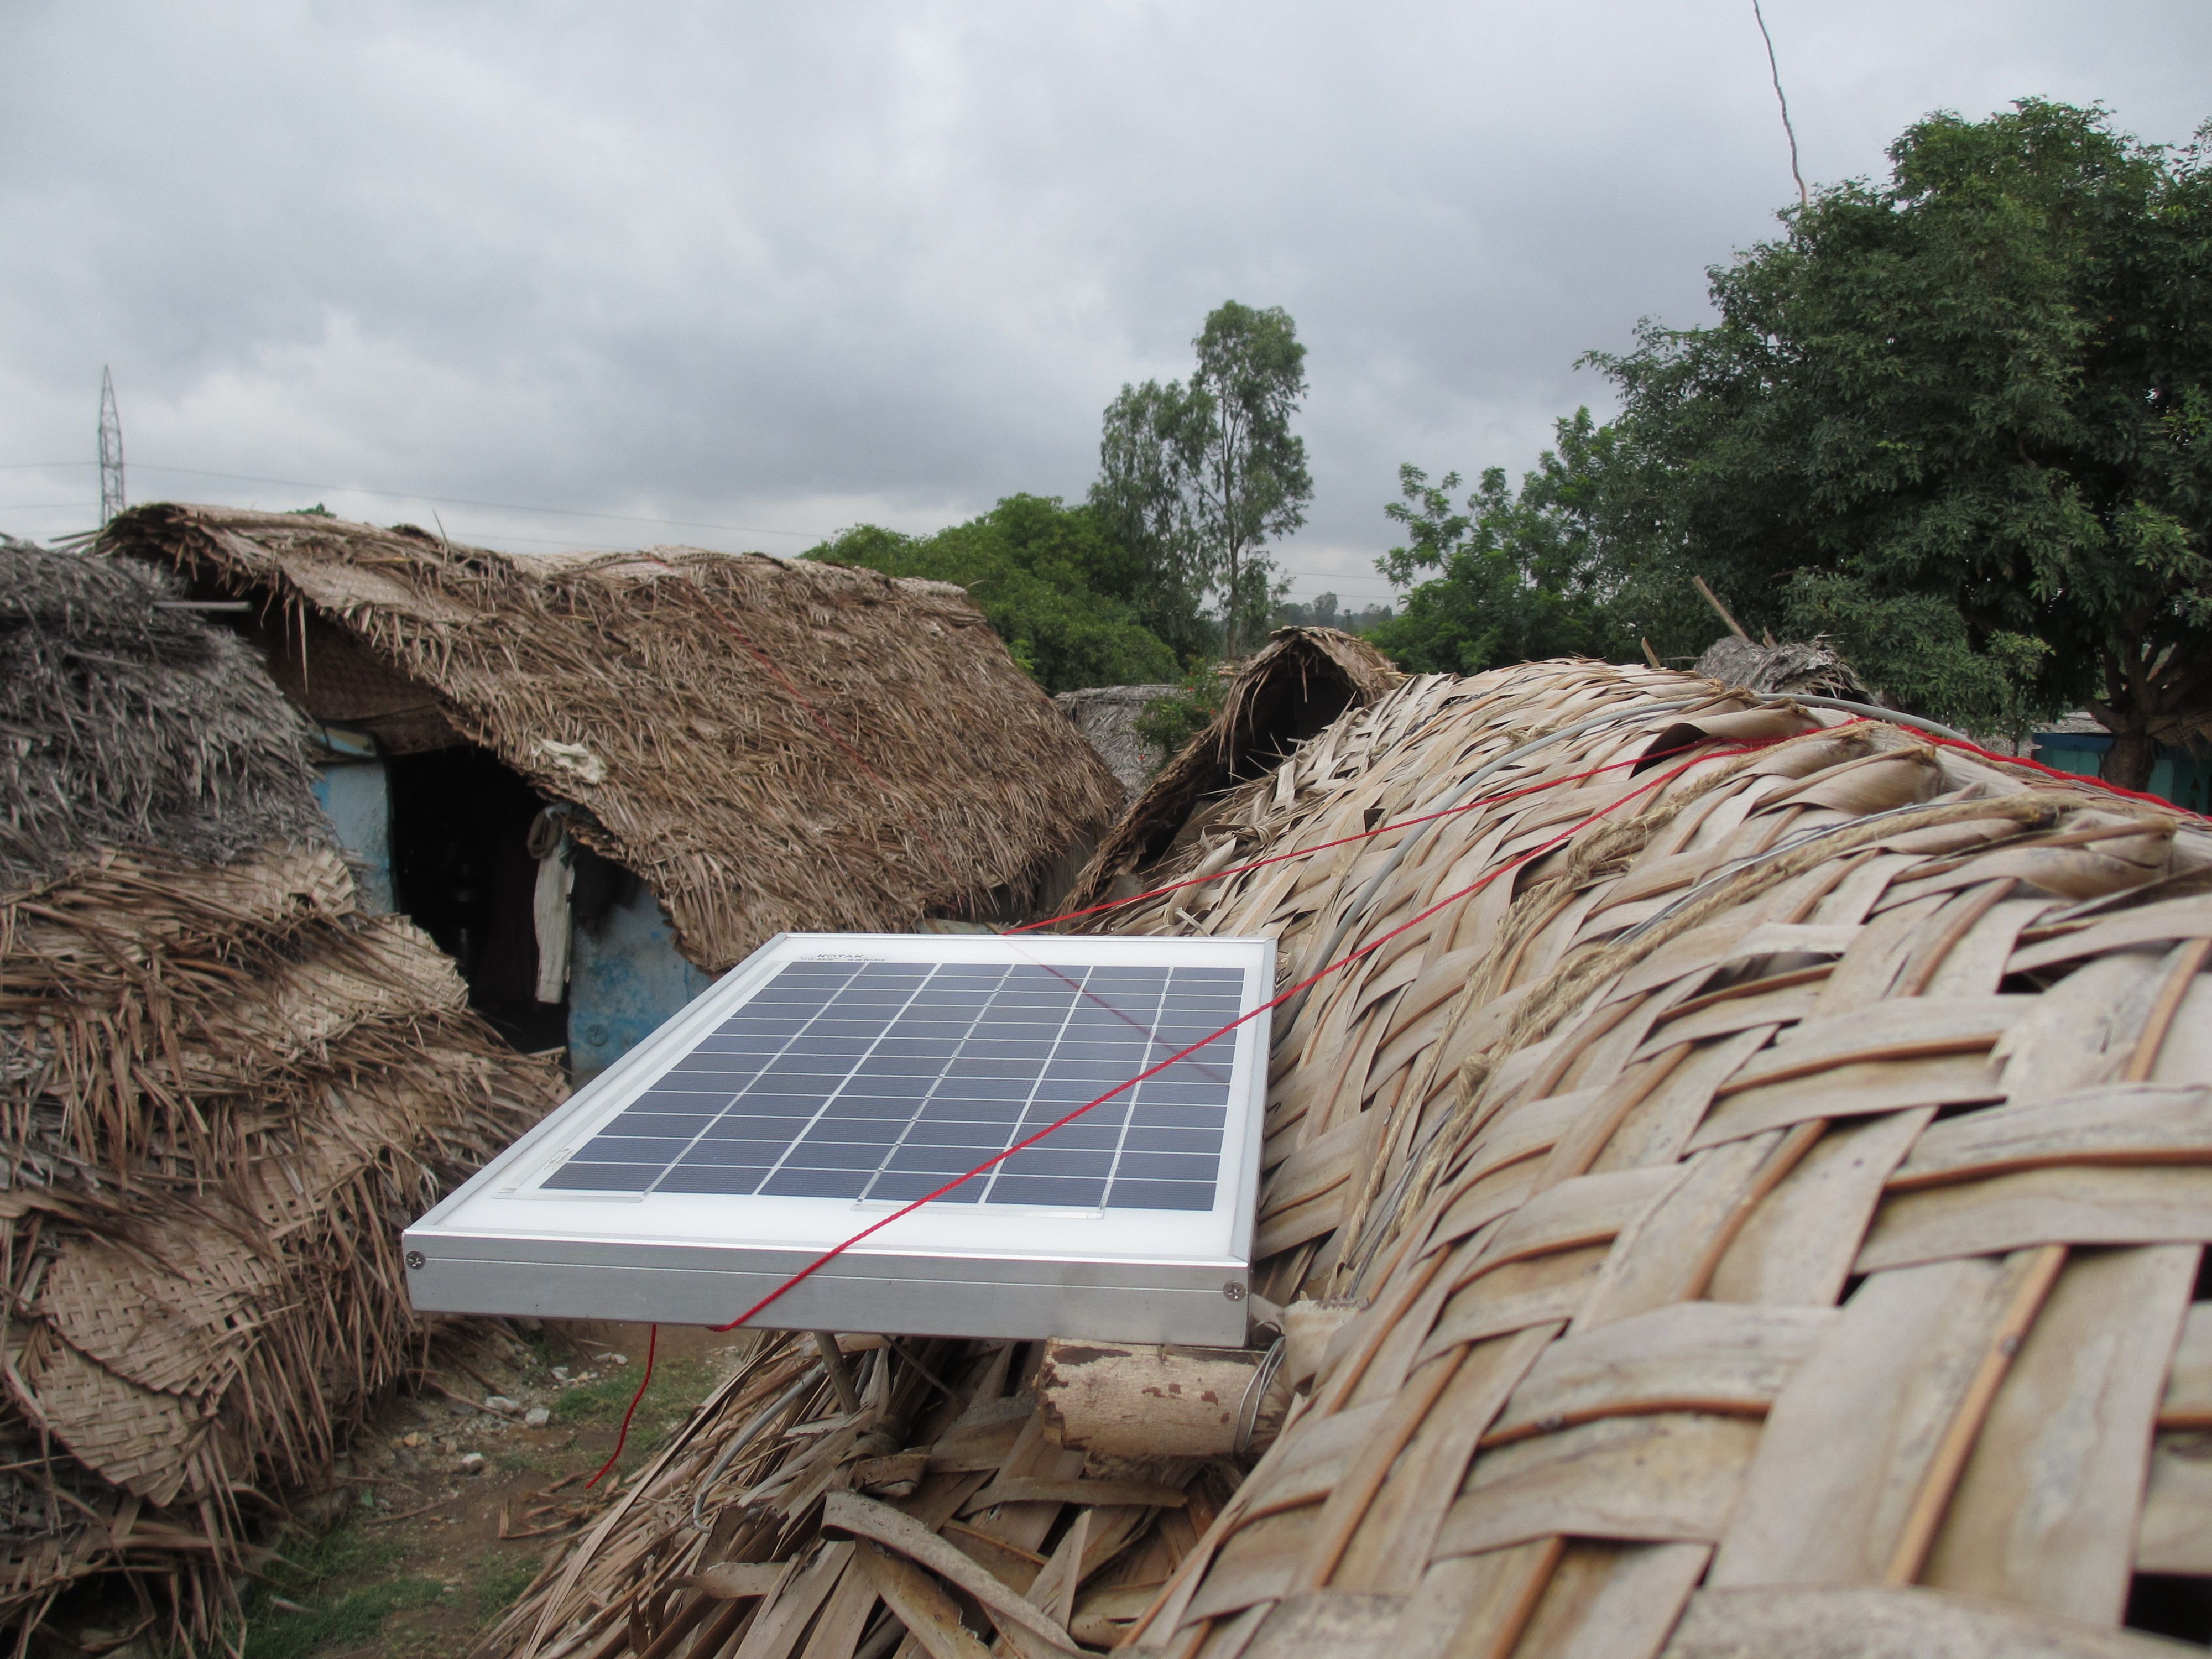 A single 3.3W solar panel on a roof in India